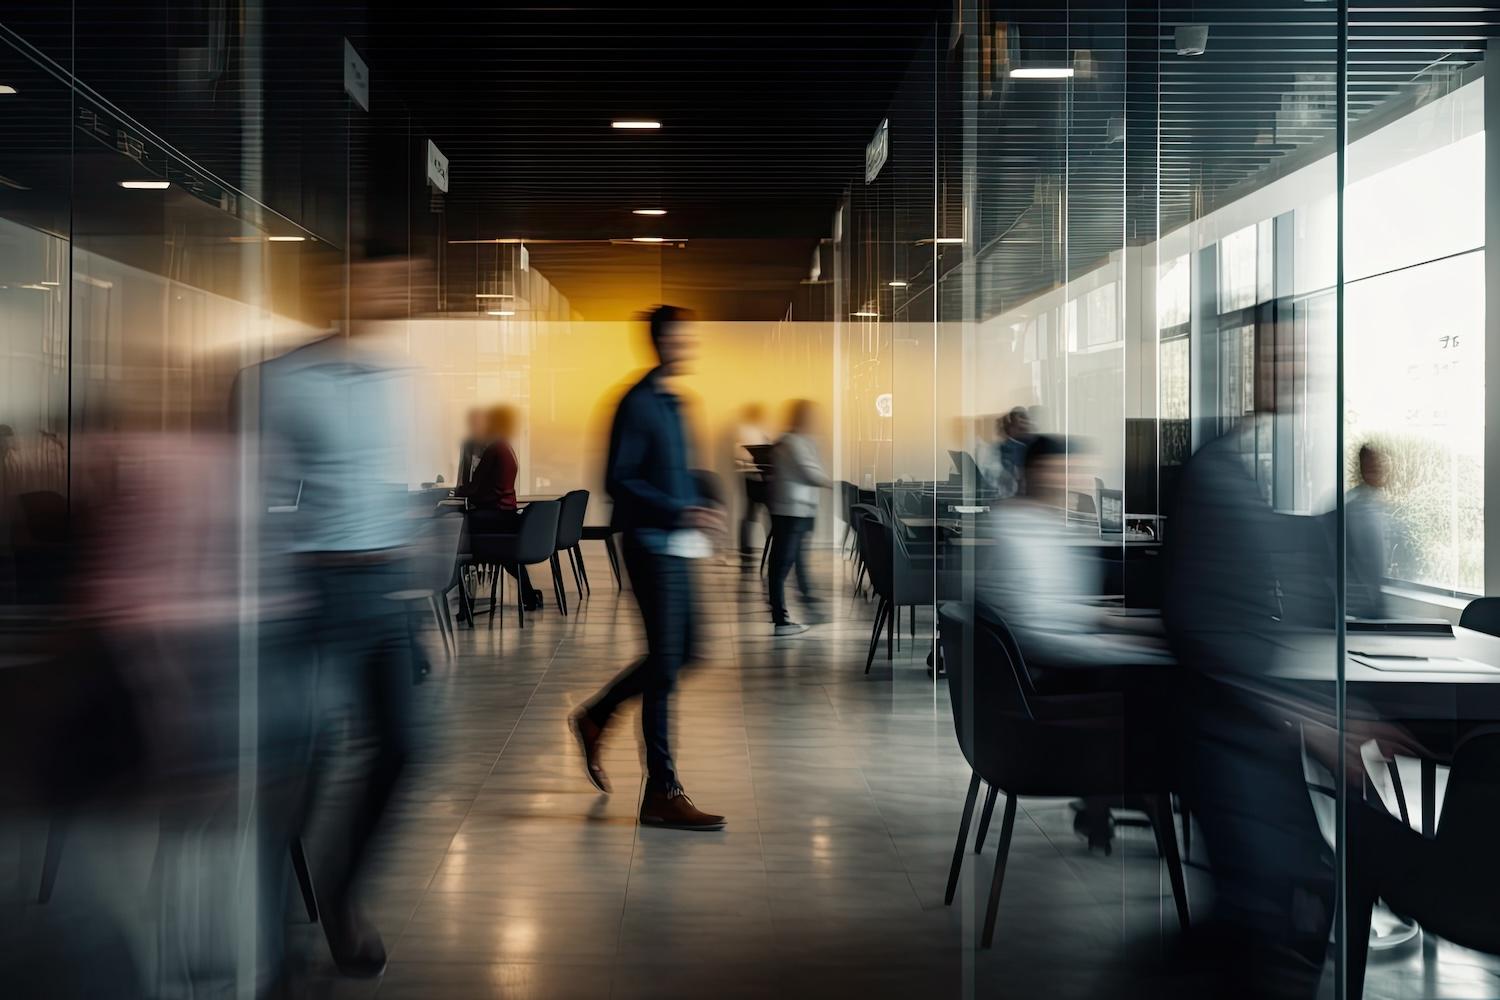 blurred image of people working in an office - greenhushing at corporations